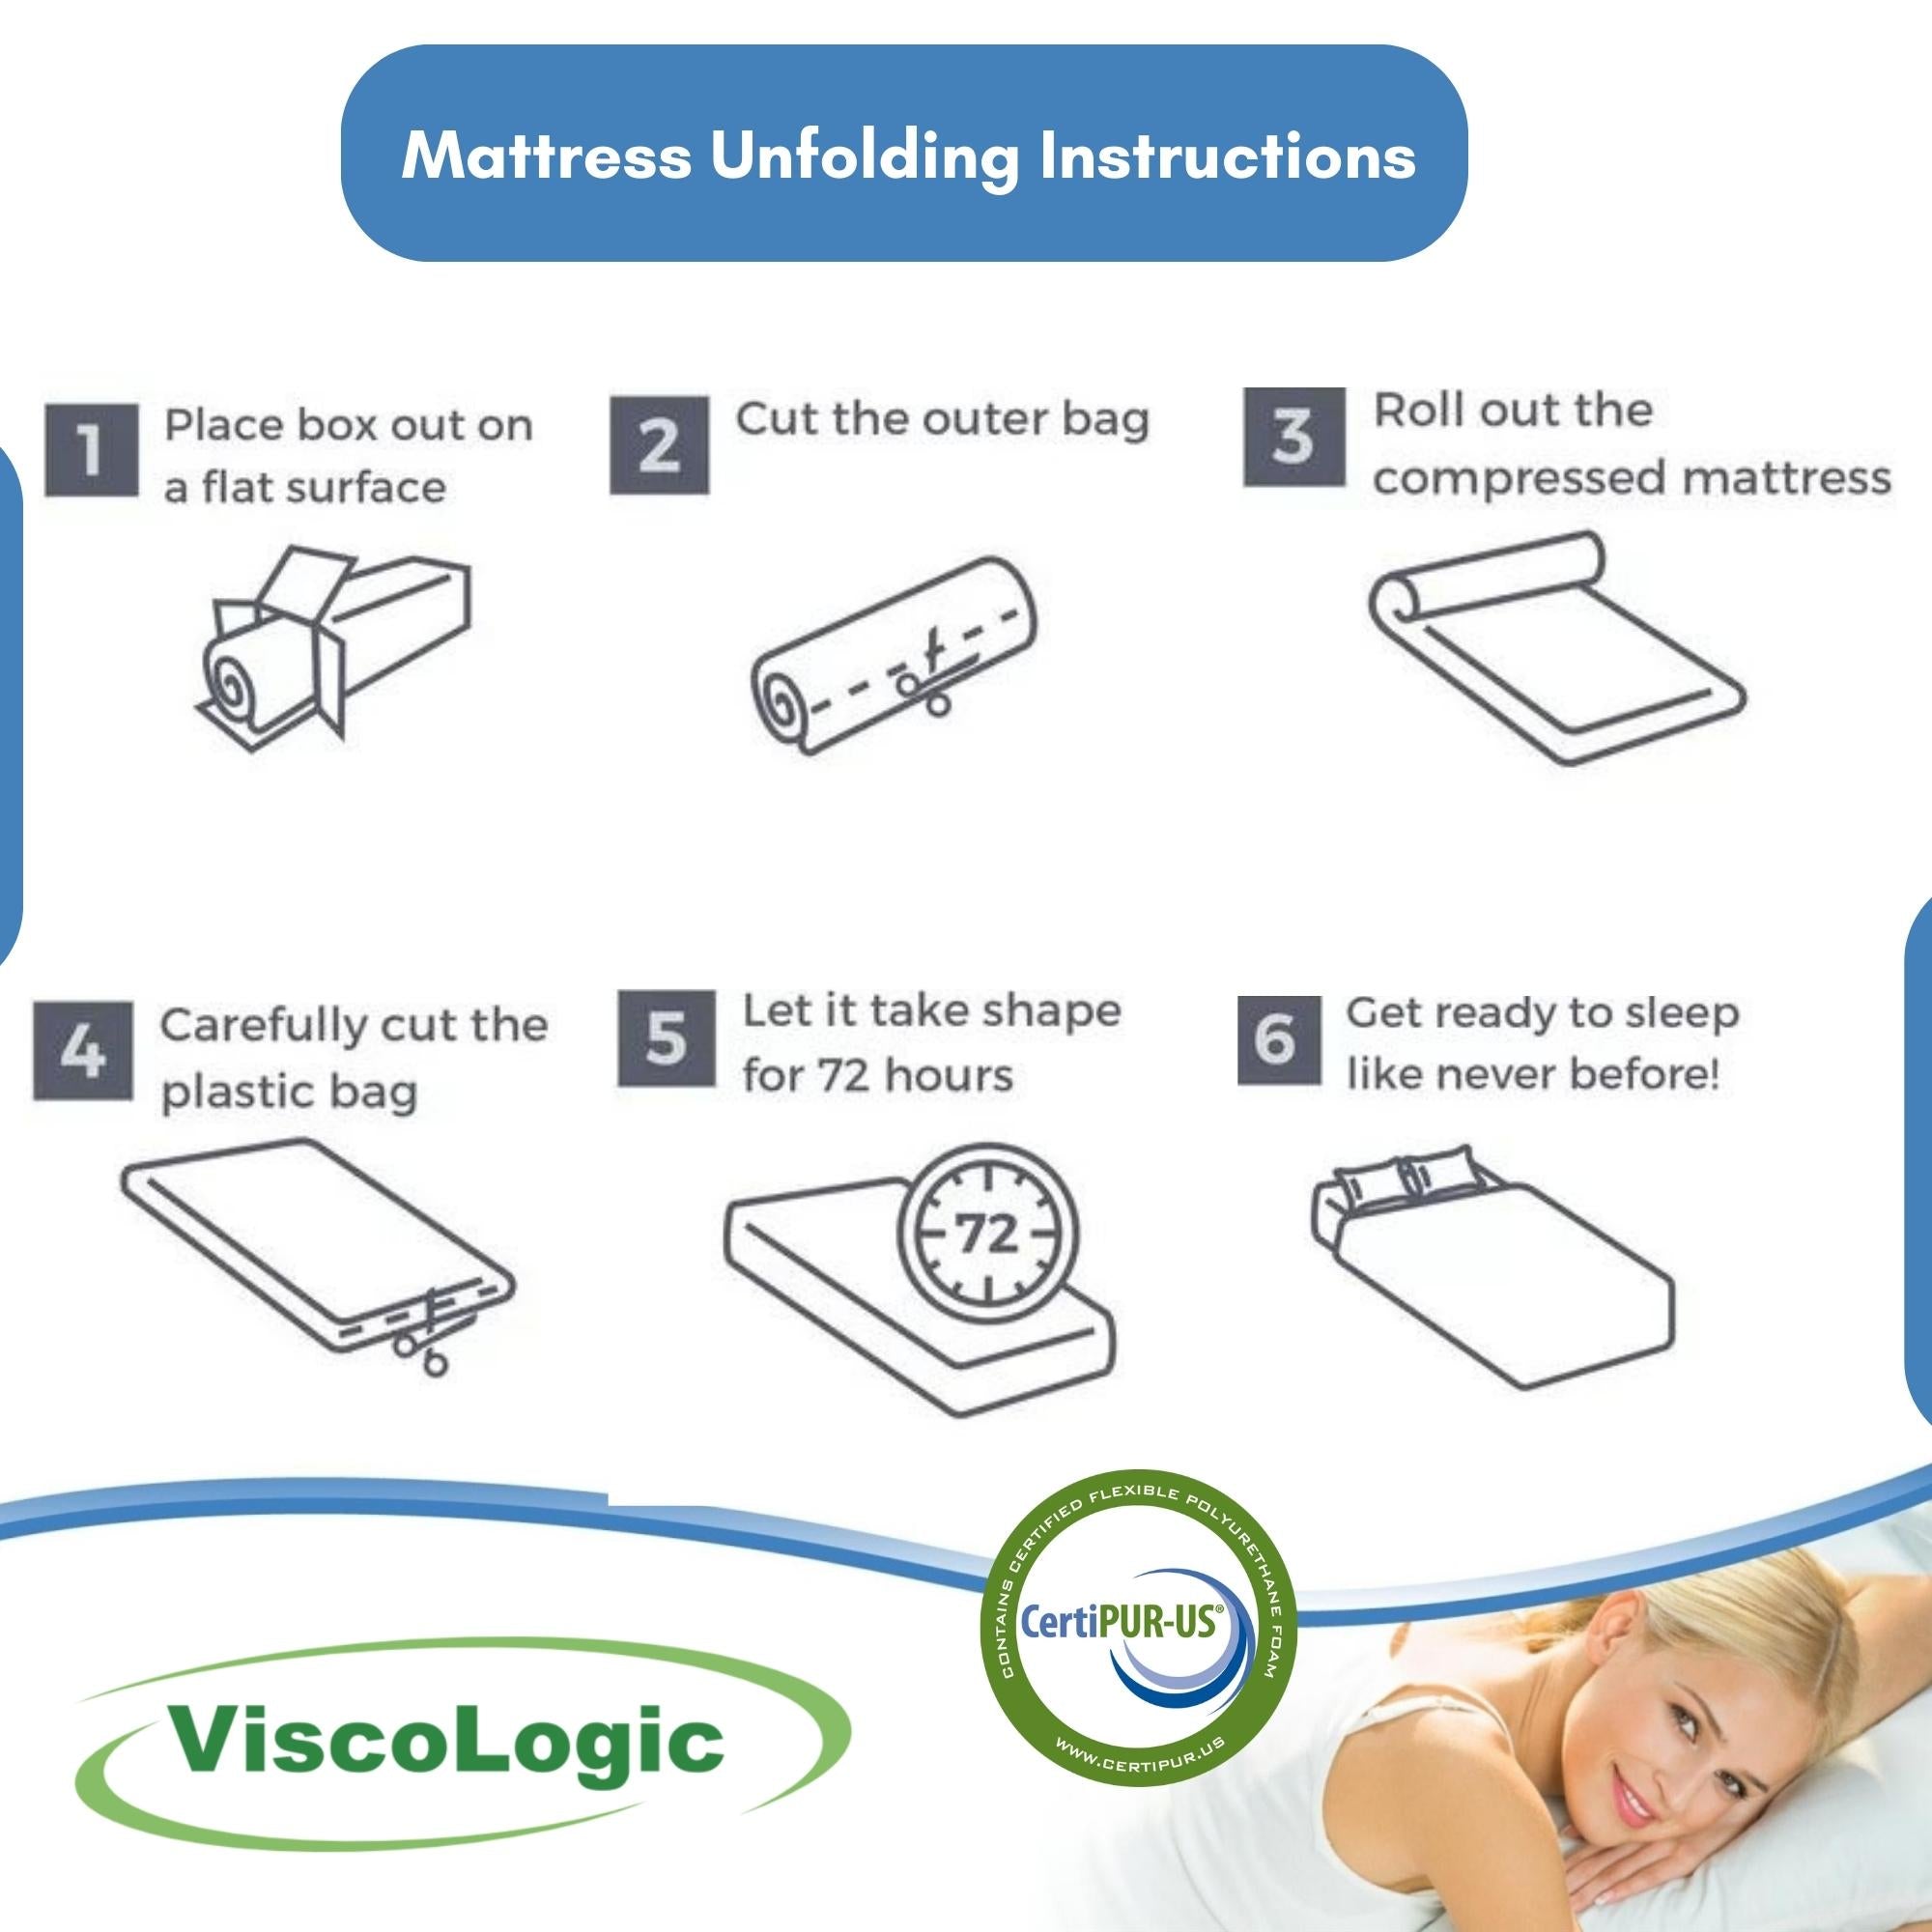 ViscoLogic PRESTIGE Flip able Reversible Twin Foam Mattress Perfect for Bunk Bed, Trundle, Guest Bed and Caravan Bed (Dark Blue)